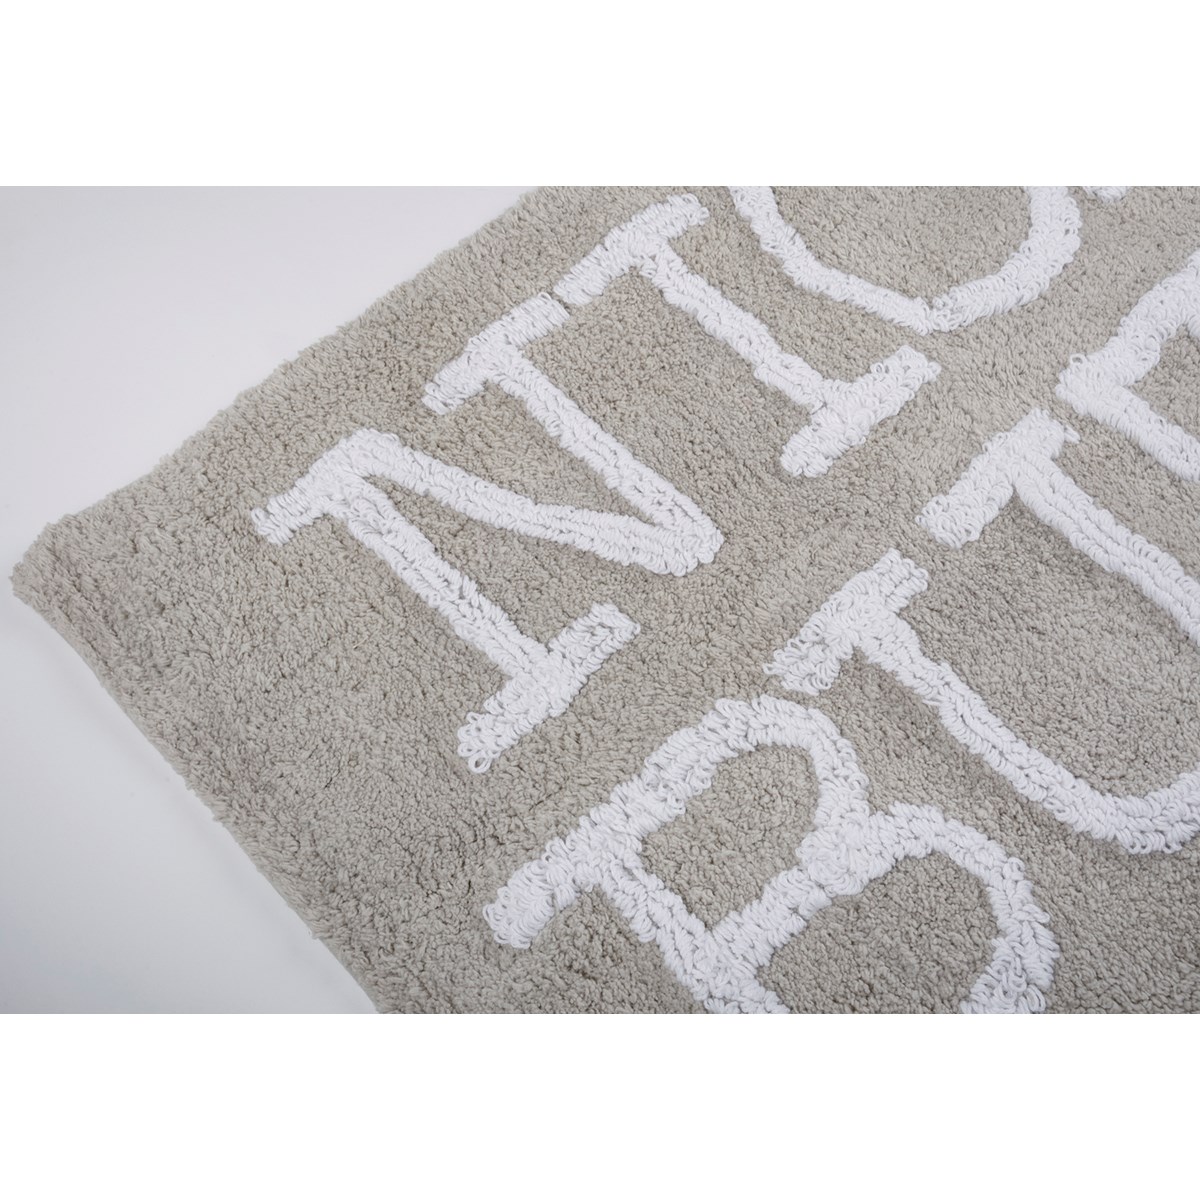 Nice Butt Bath Rug - Cotton, Latex skid-resistant backing